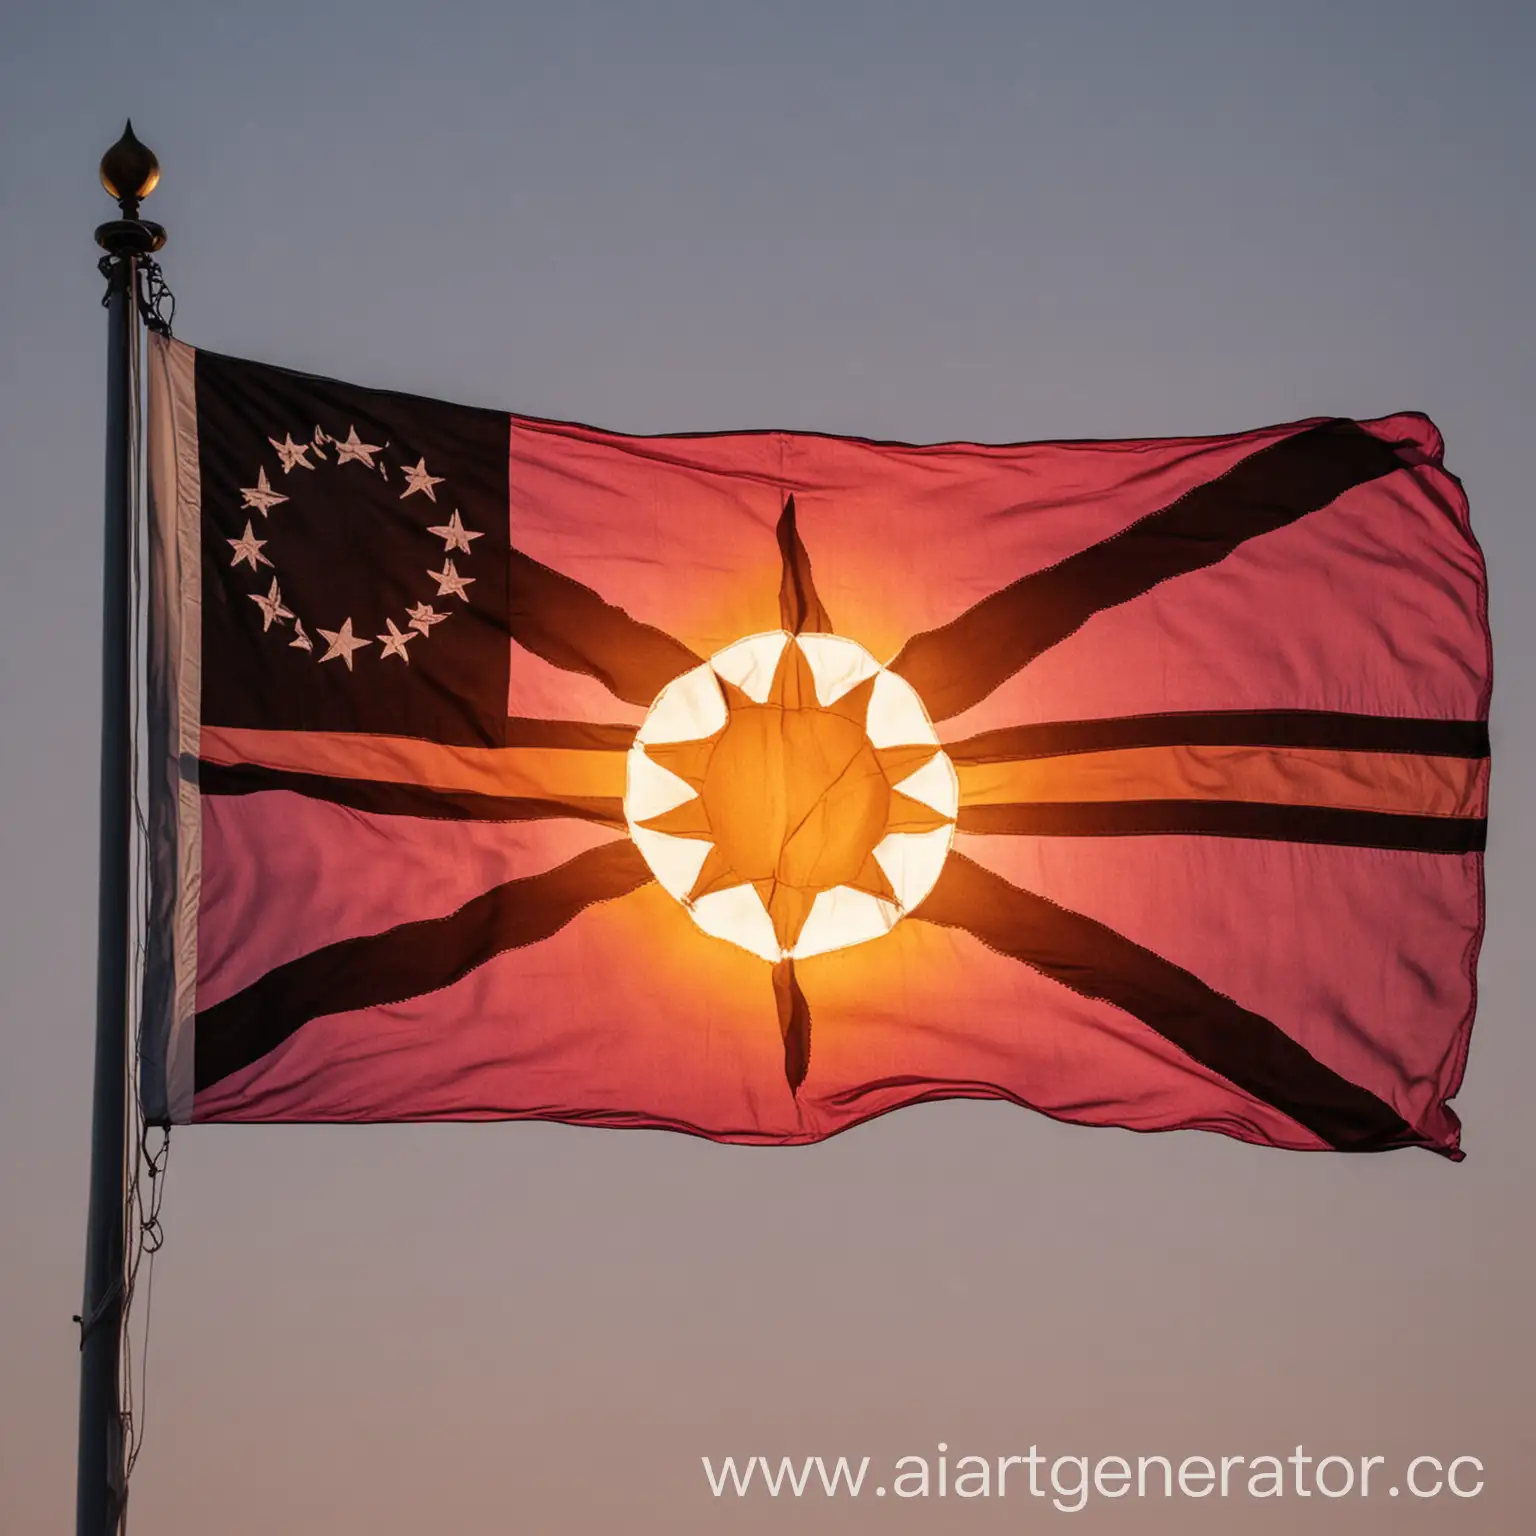 The flag is a triangular flag with the upper corner in pink, which gradually transitions to orange at the bottom edge, symbolizing sunrise and sunset. In the middle of the flag is a black stripe, on which a white sun and a blue star are depicted. The sun and star represent light and hope, while the black color symbolizes strength and resilience. All colors and symbols on the flag are united to reflect the unity and pride of the nation.